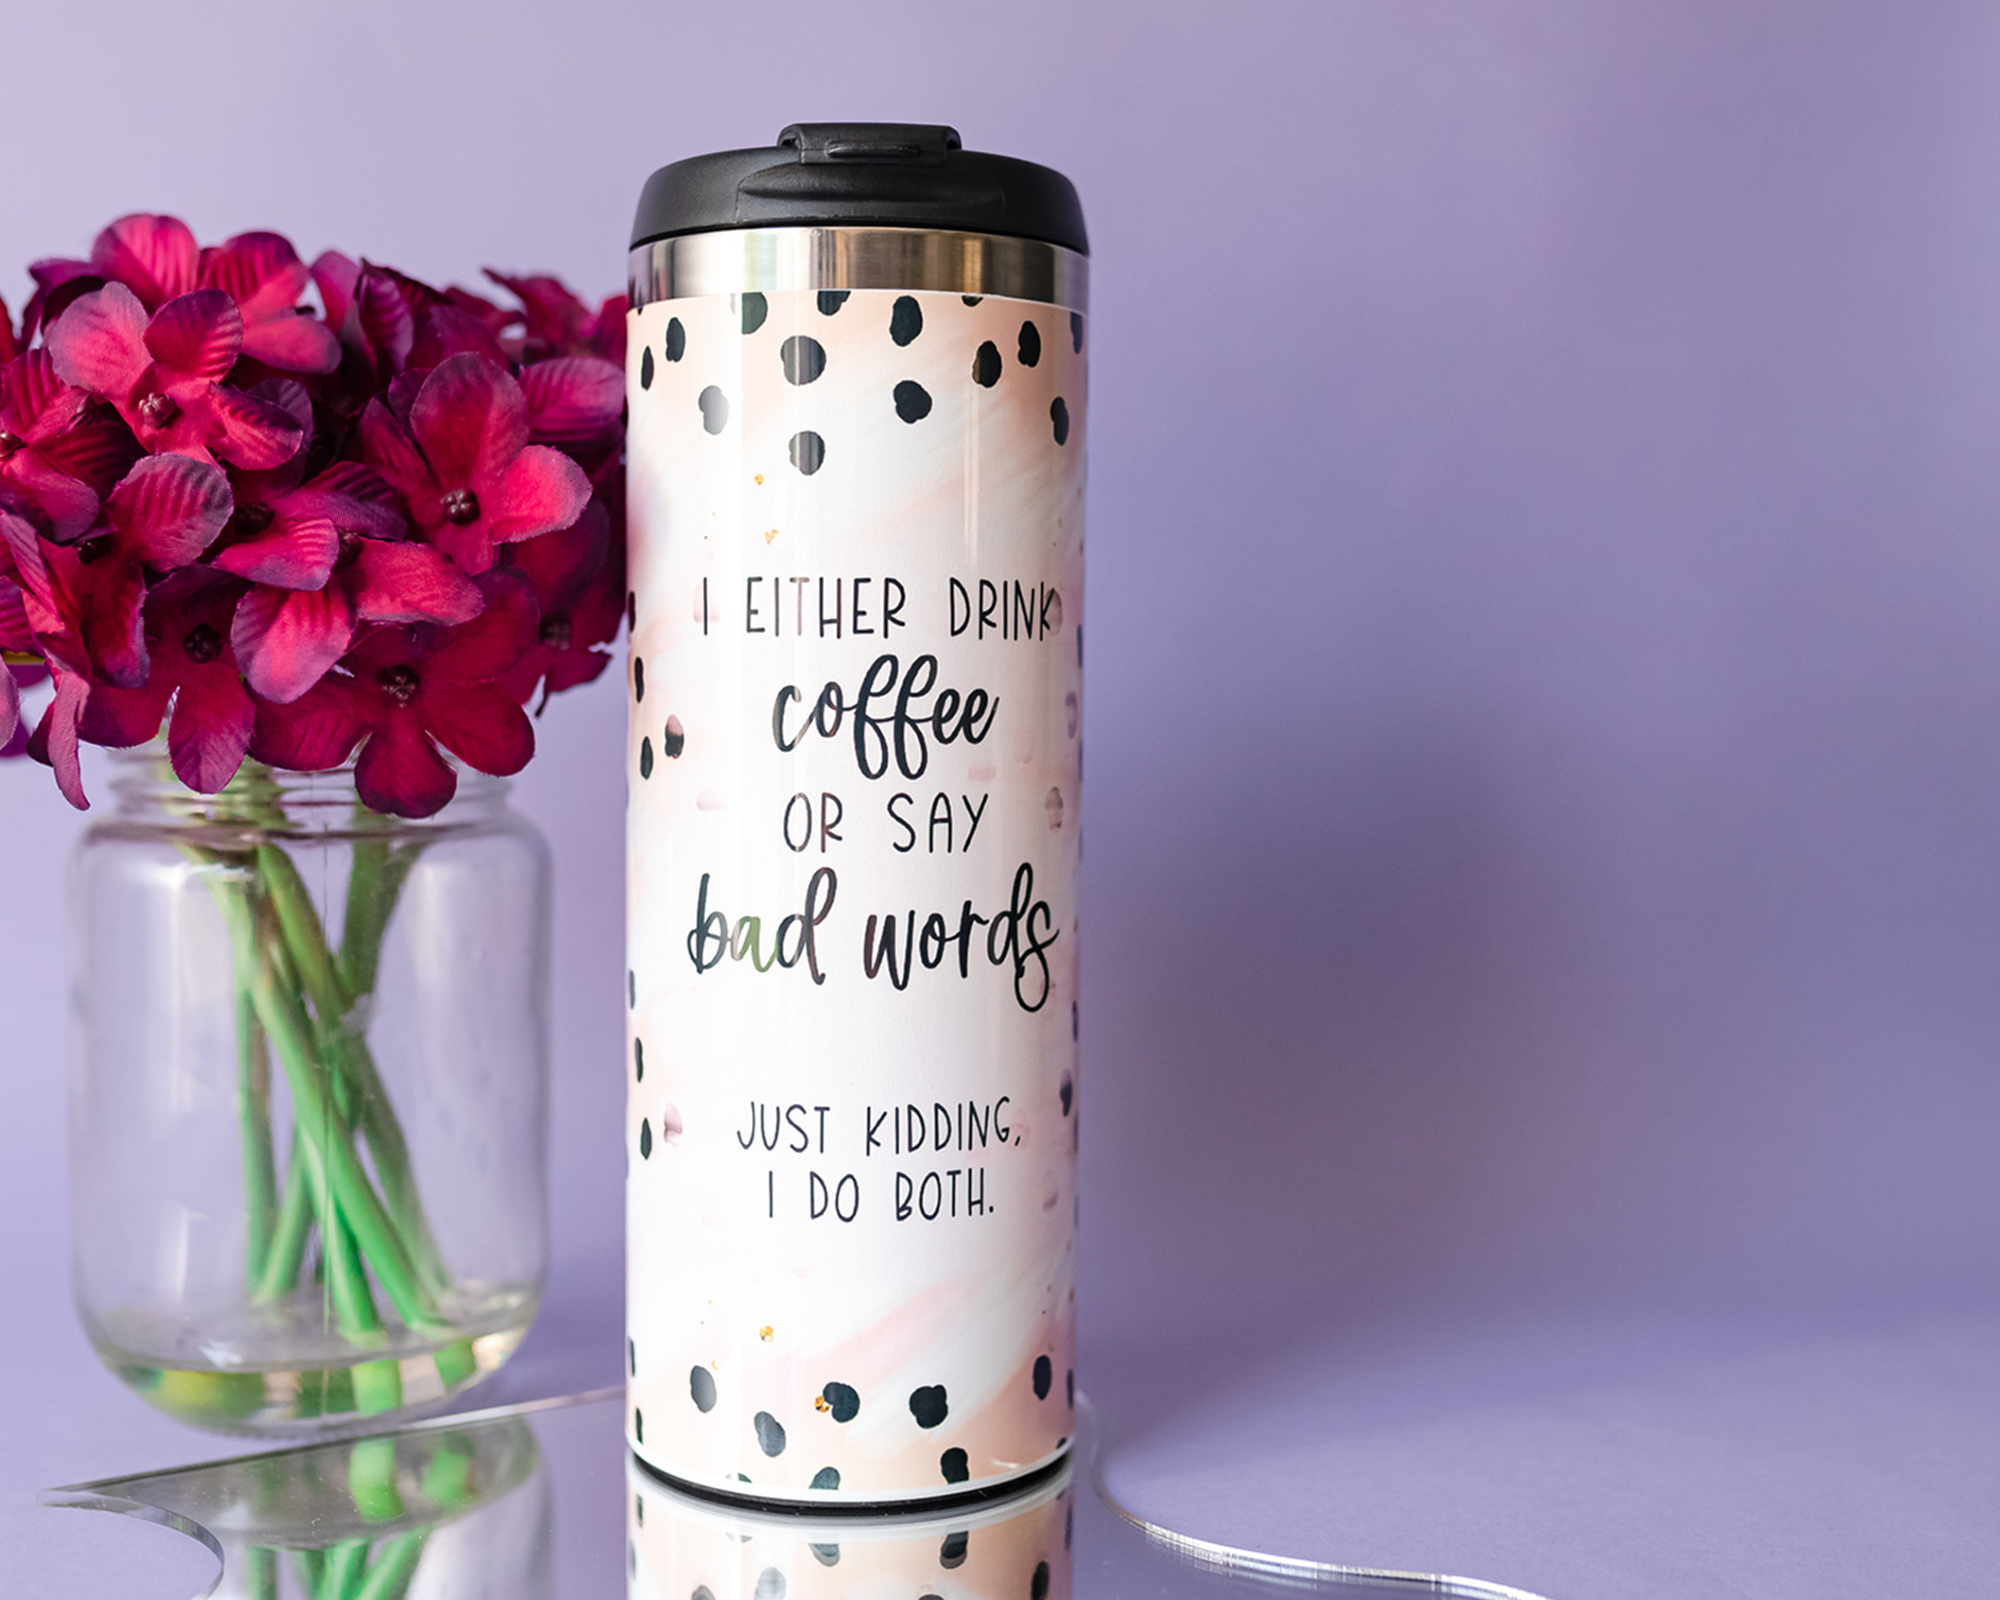 https://cdn.shopify.com/s/files/1/0086/8283/1987/products/IEitherDrinkCoffeeOrSayTravelMug3_2000x.png?v=1631072074